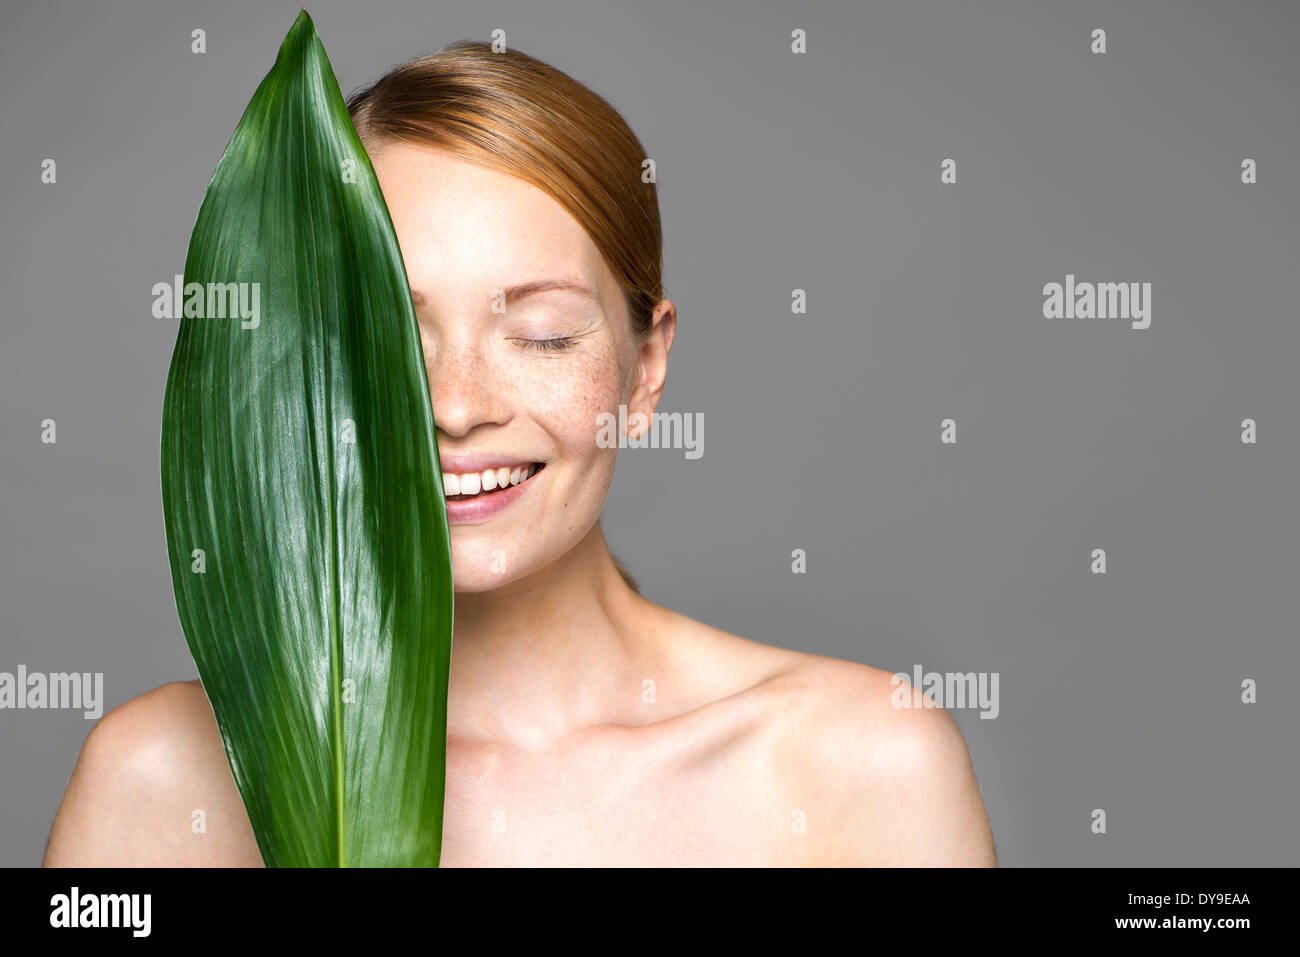 Young woman holding up leaf concealing part of face Stock Photo